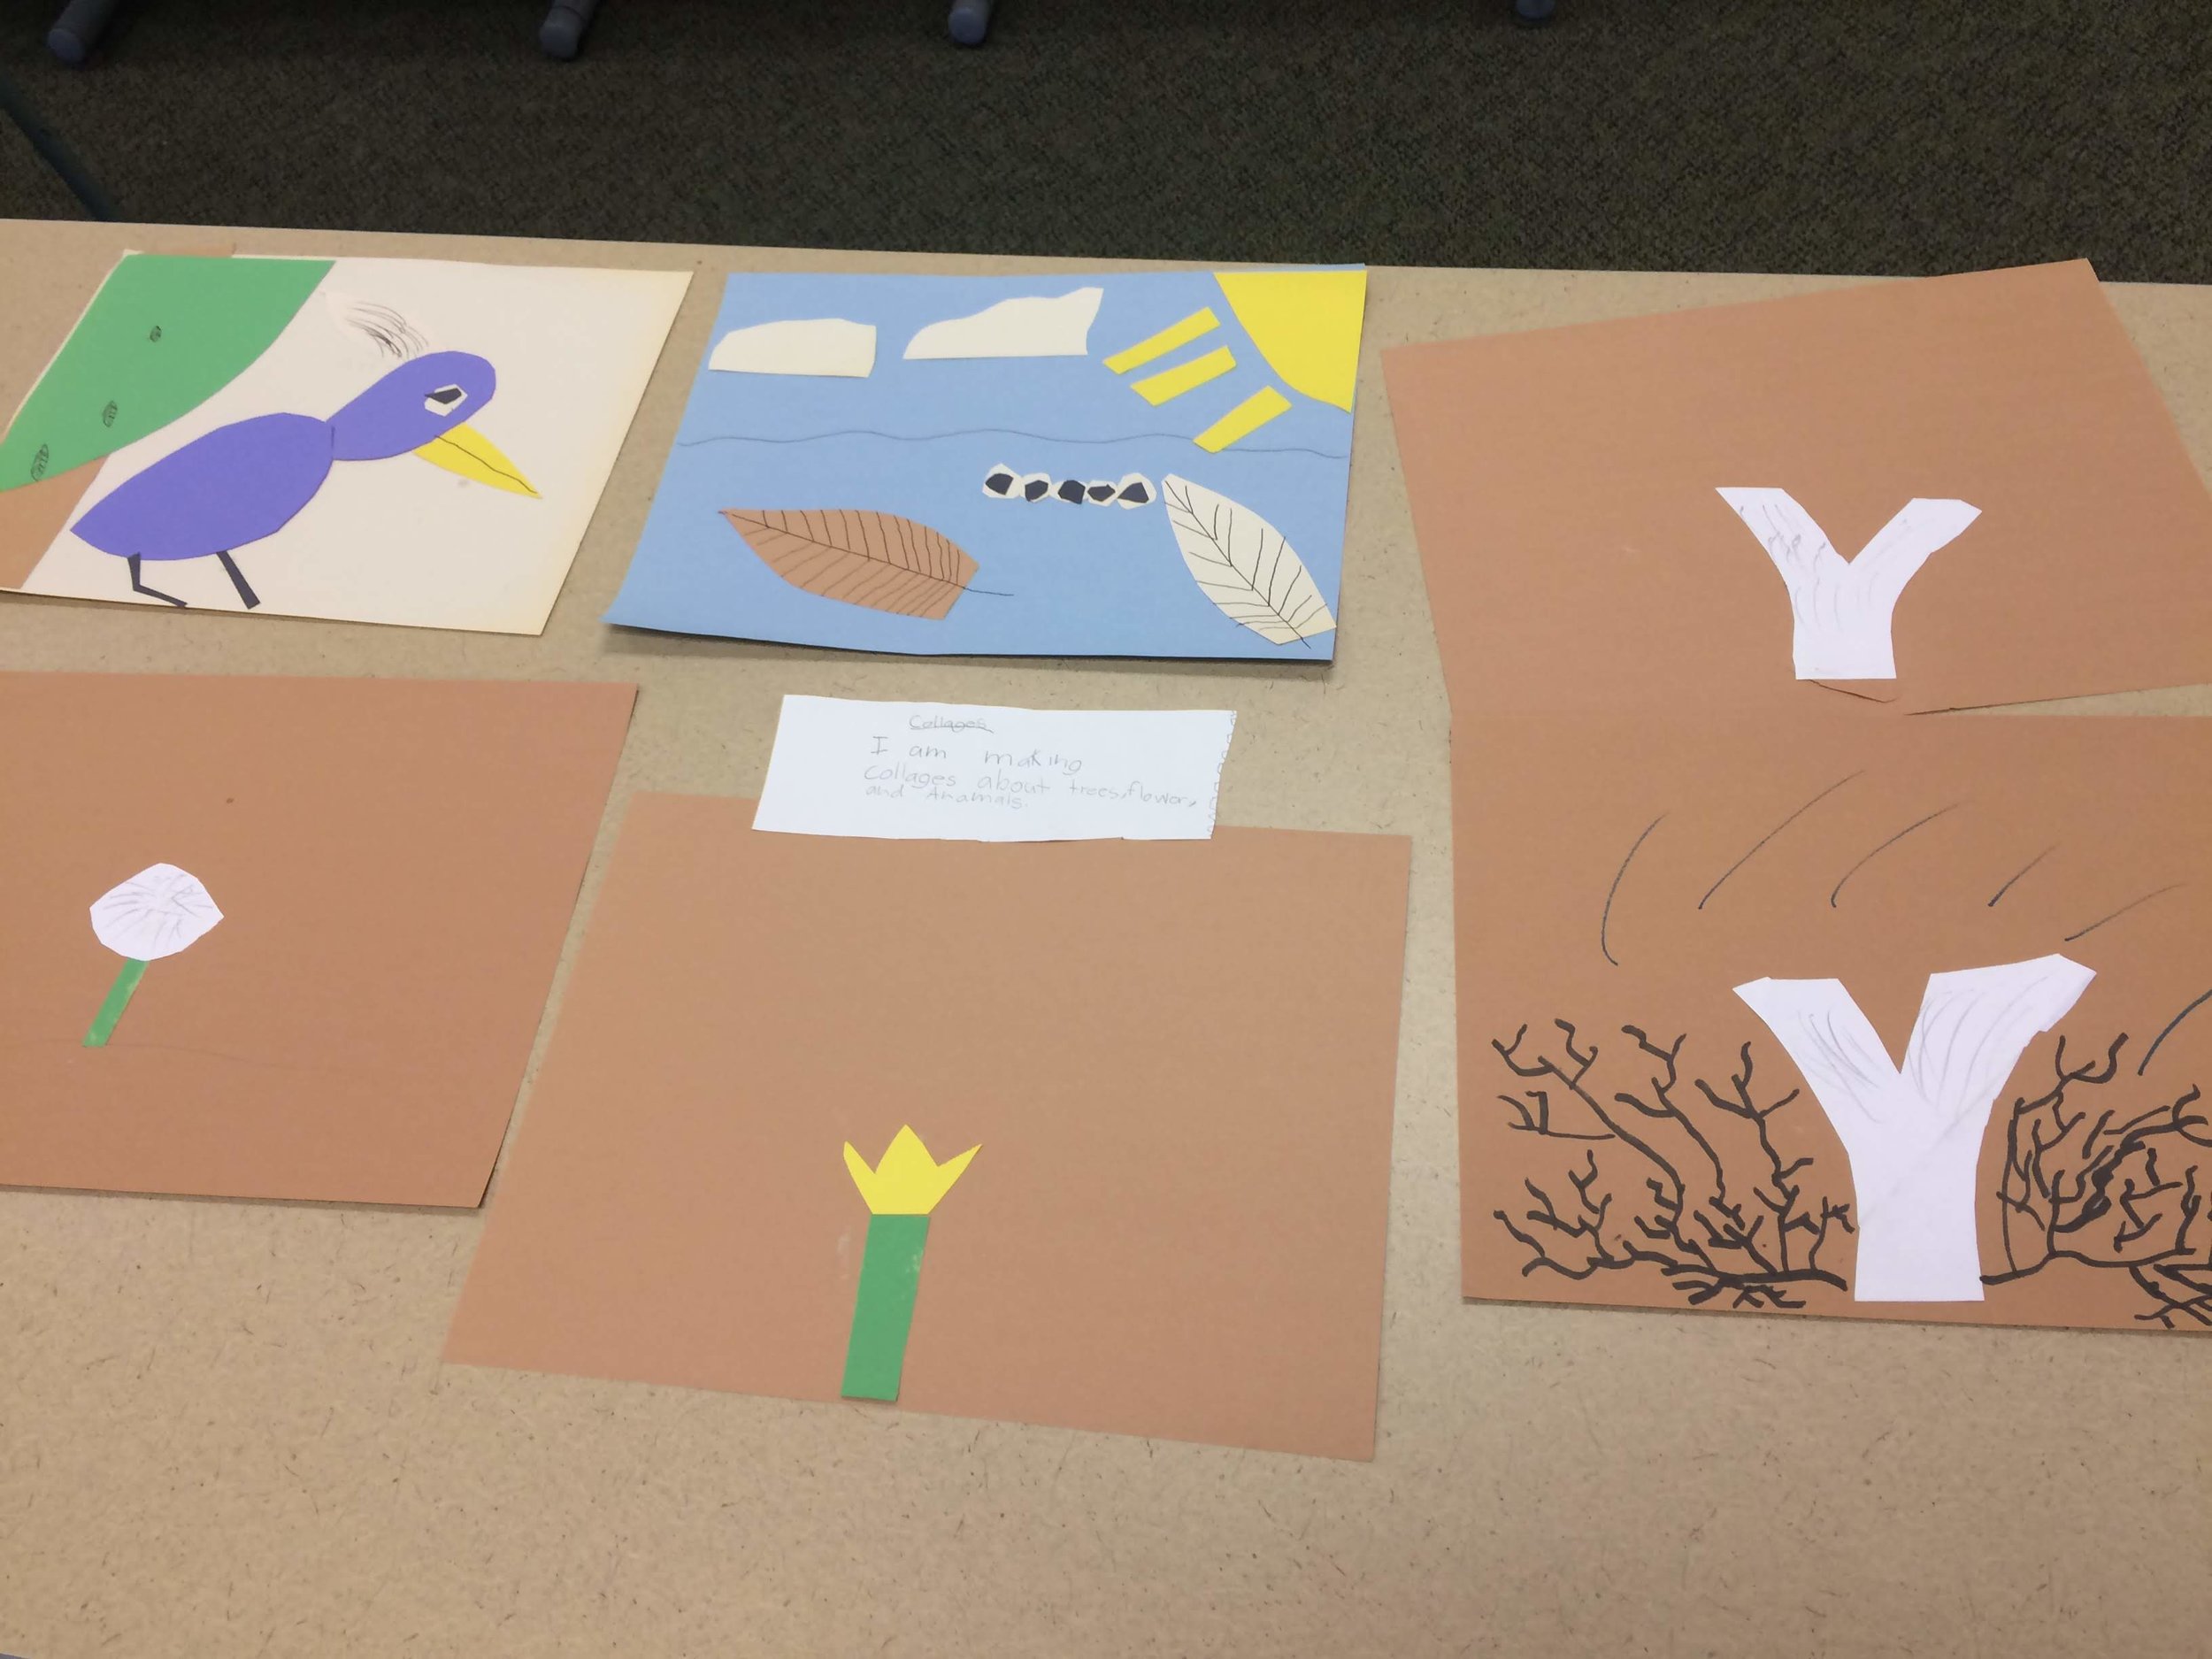 Construction paper collages of animals and plants found at Mt. Auburn